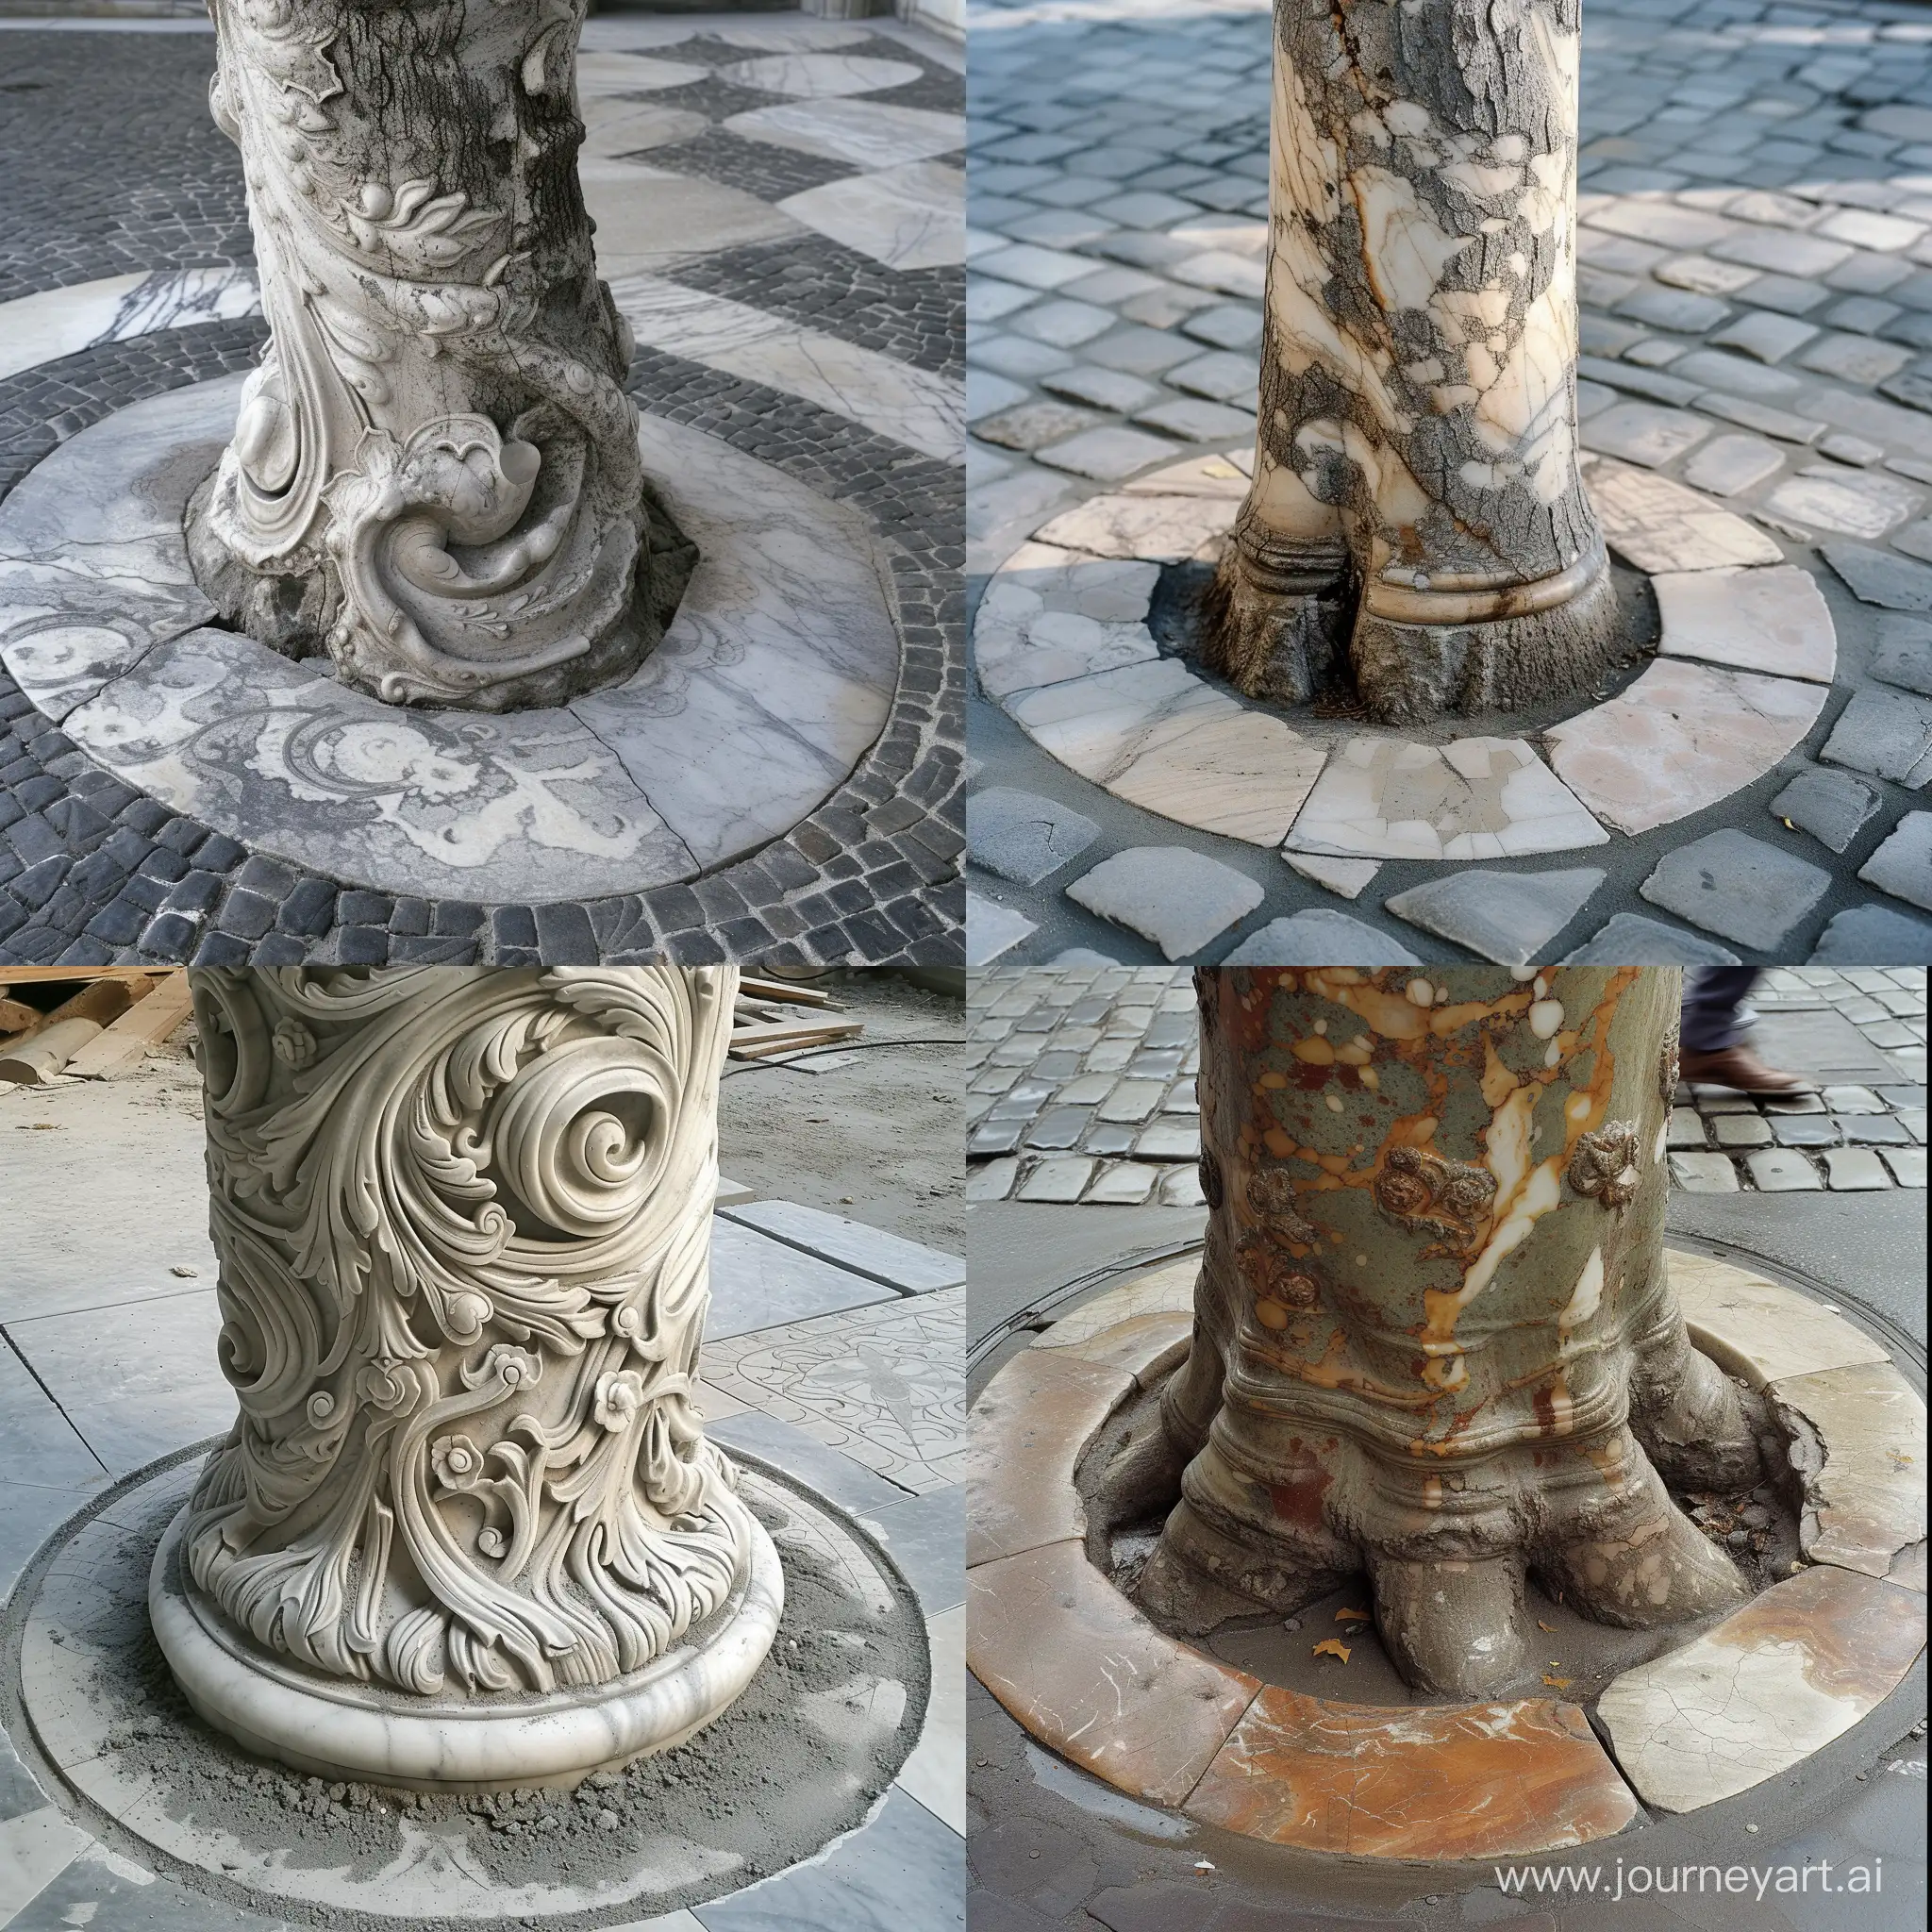 Artistic-Pavement-Work-around-a-Marble-Rococo-Tree-Trunk